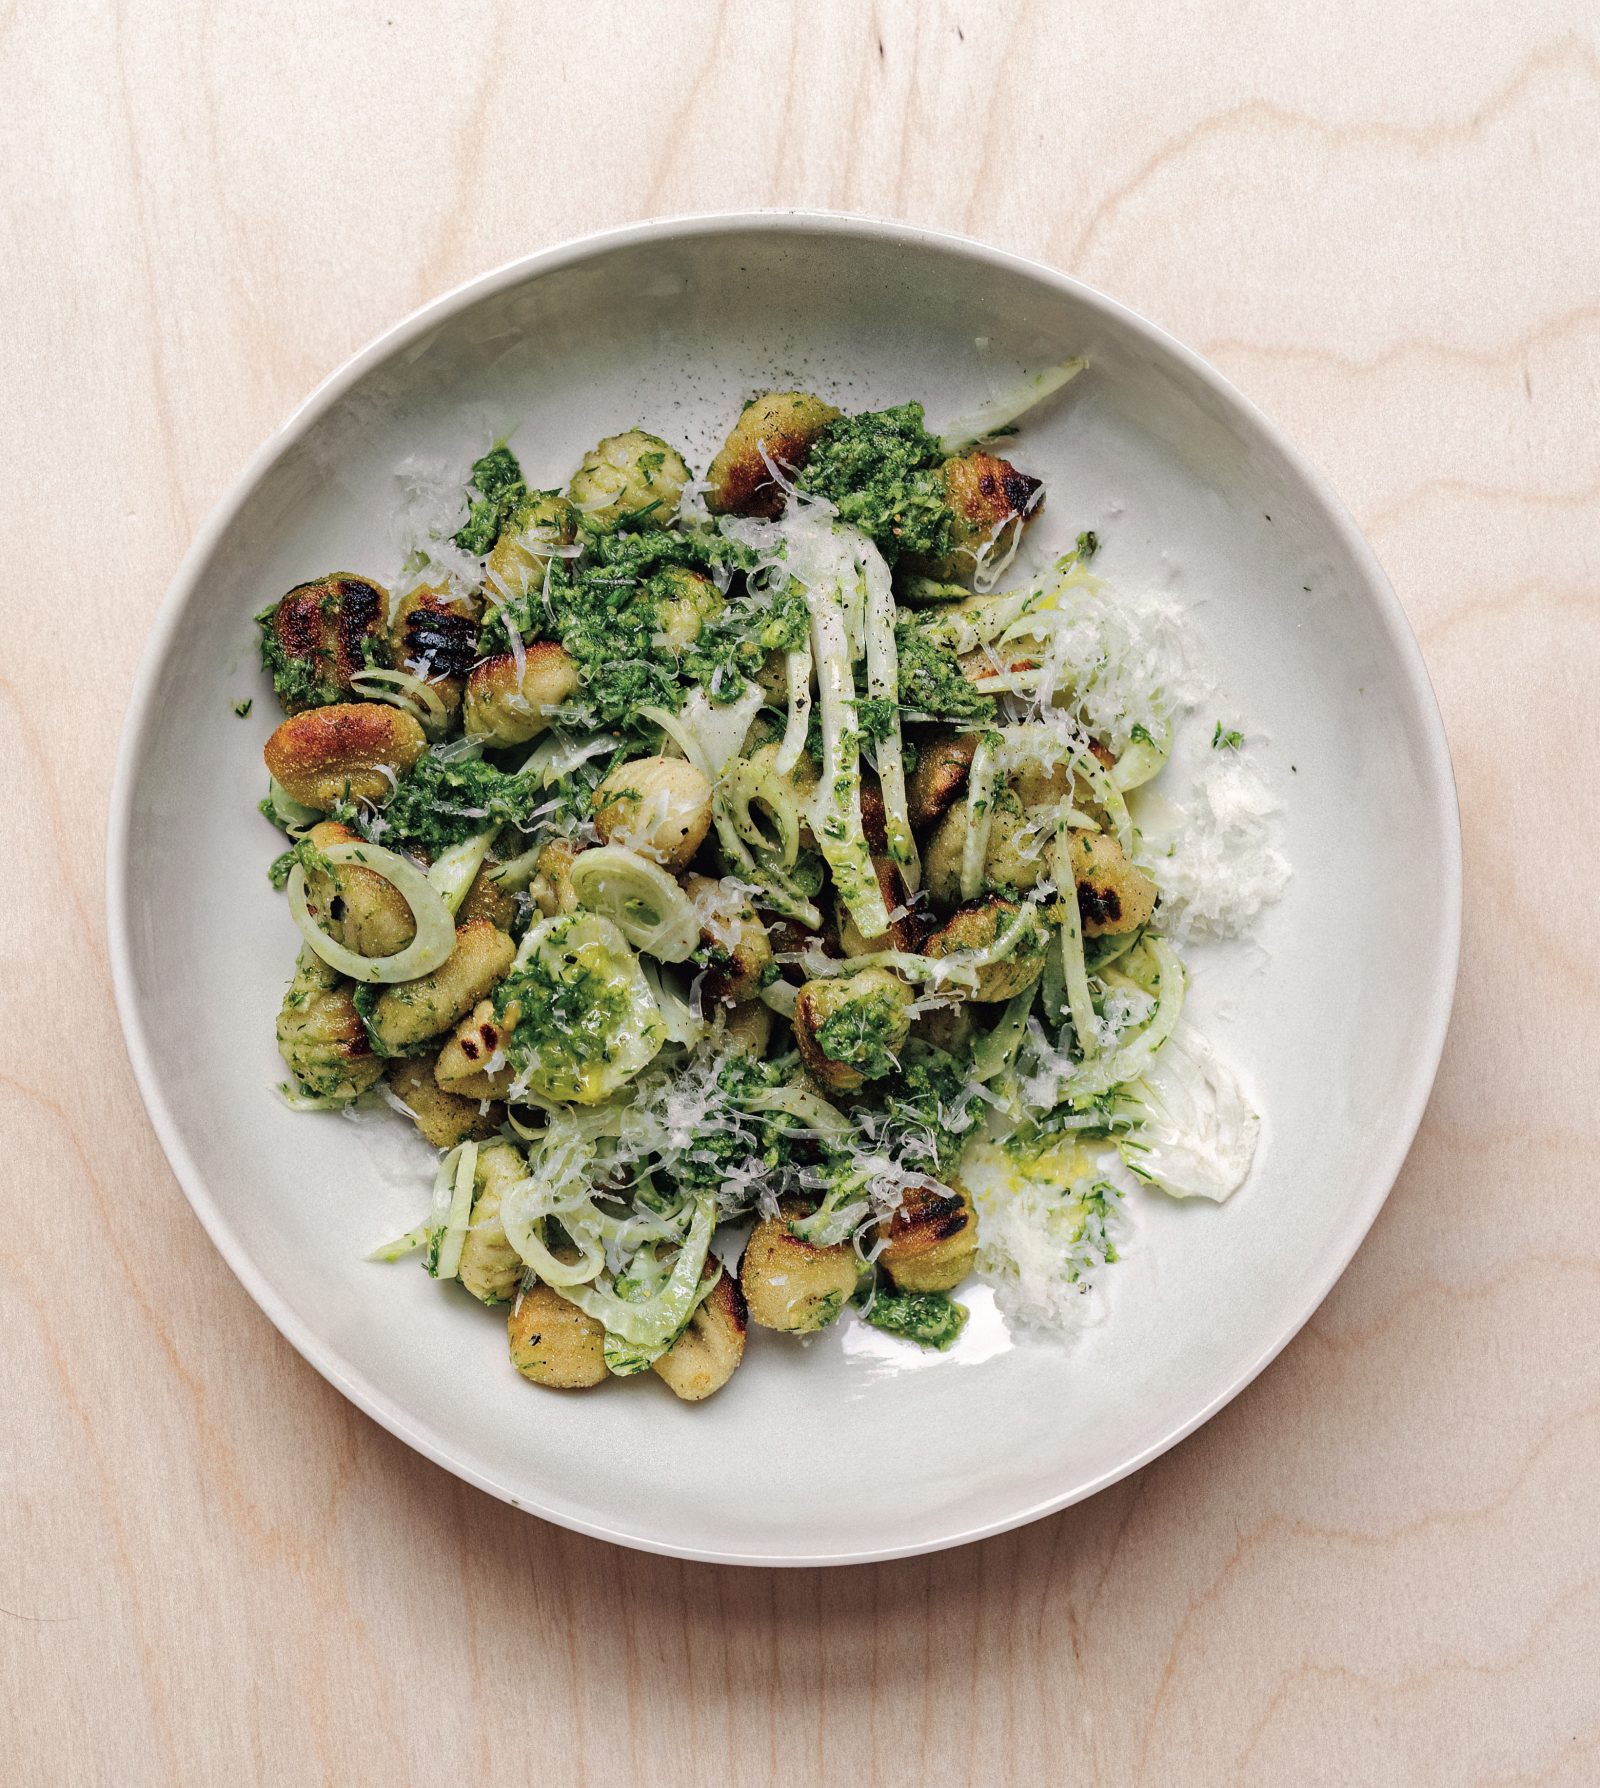 Fennel and Gnocchi Salad with Fennel Frond Pesto